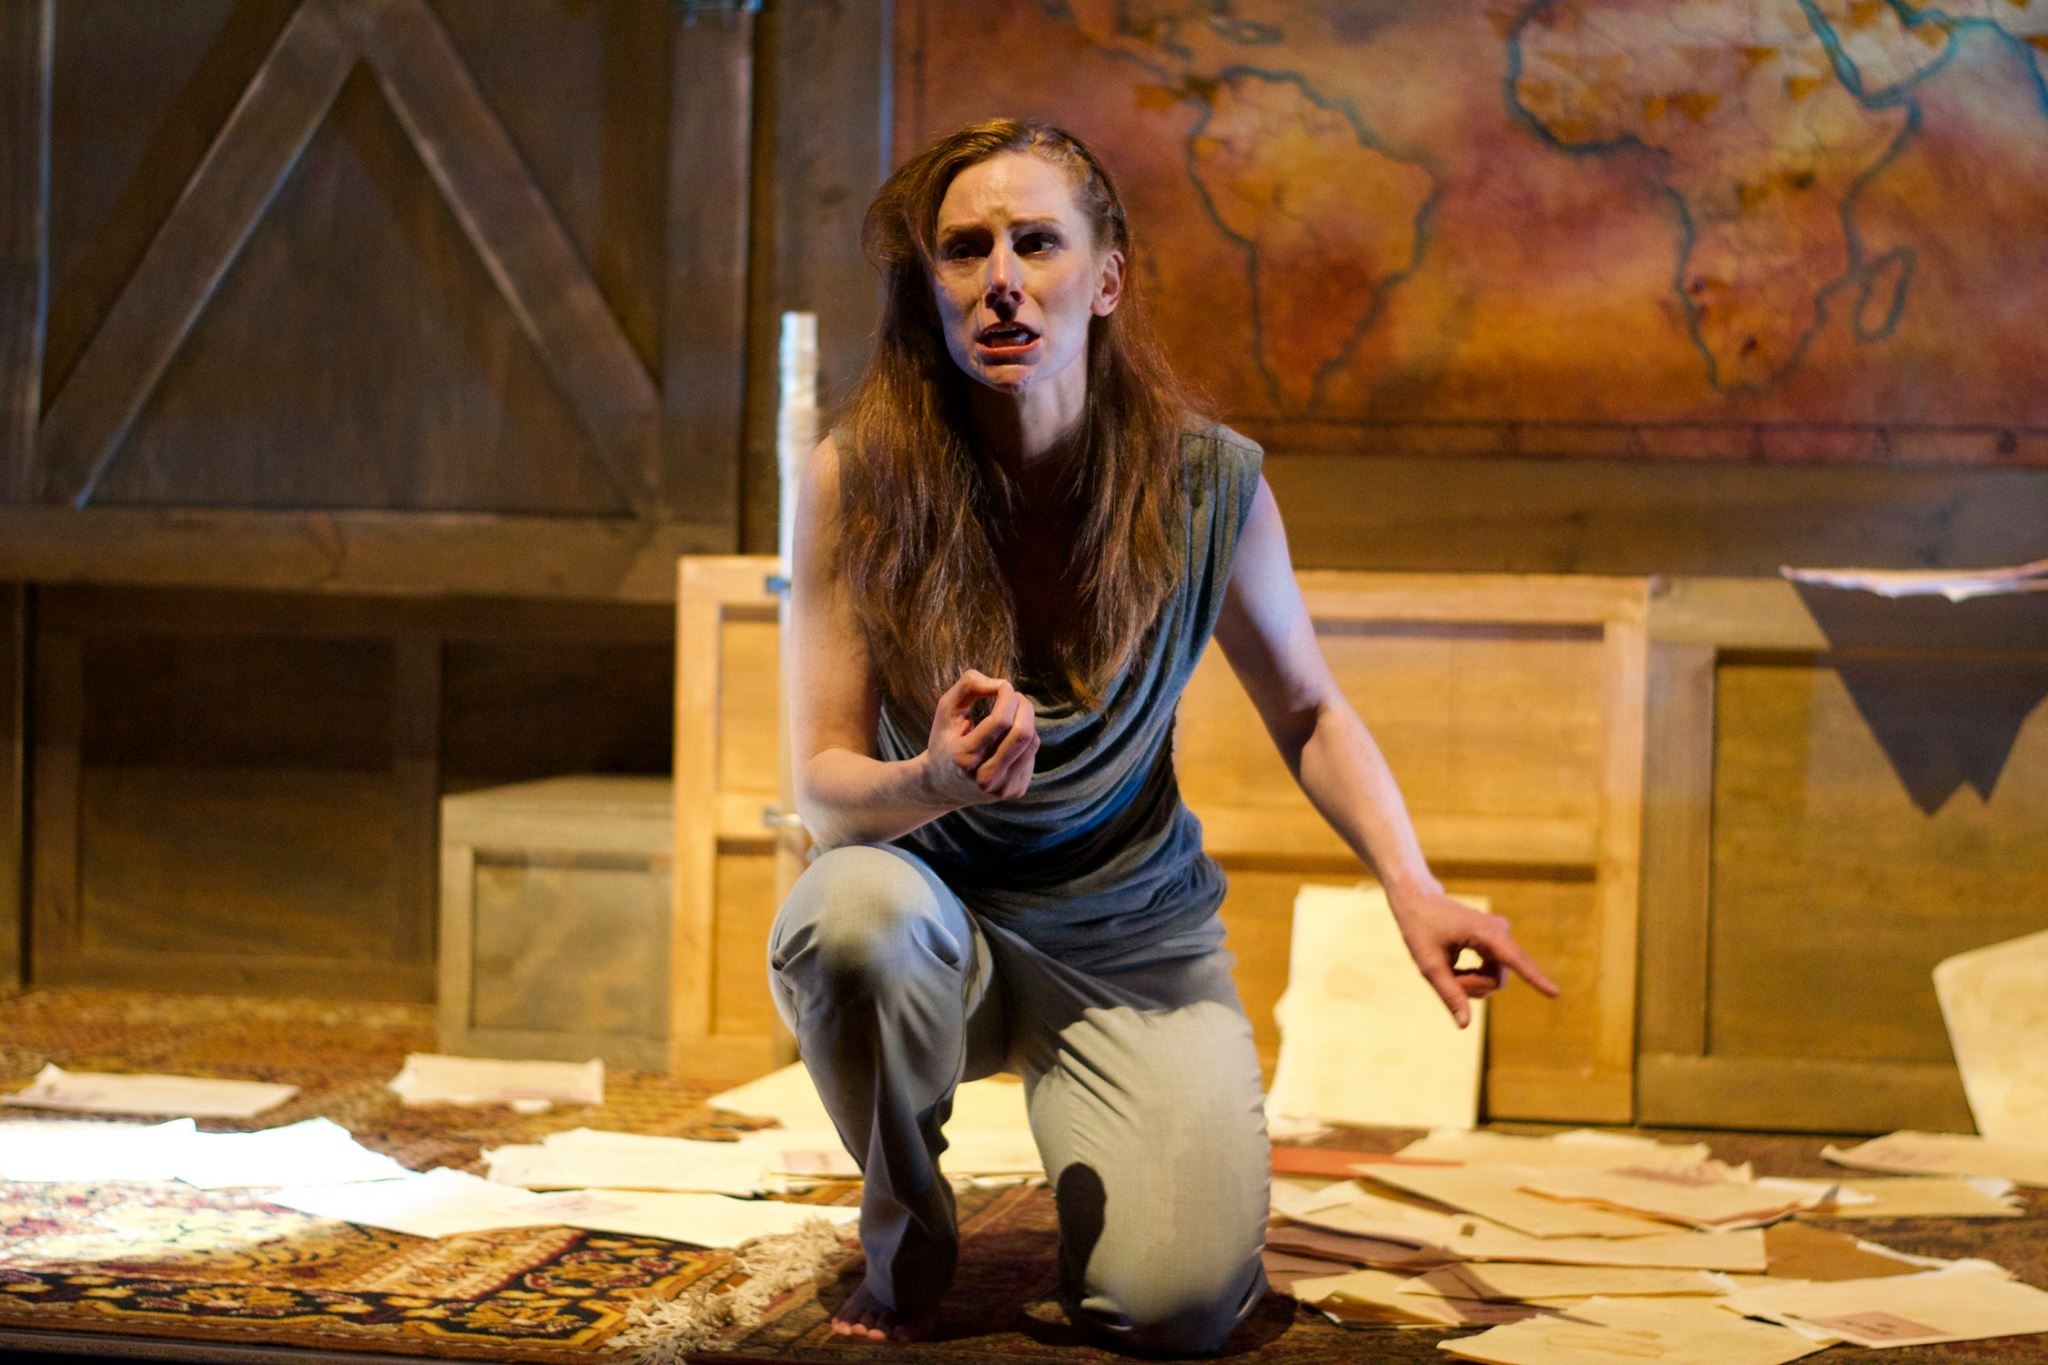 Review: One talented woman weaves a powerful, epic tale in ‘An Iliad’